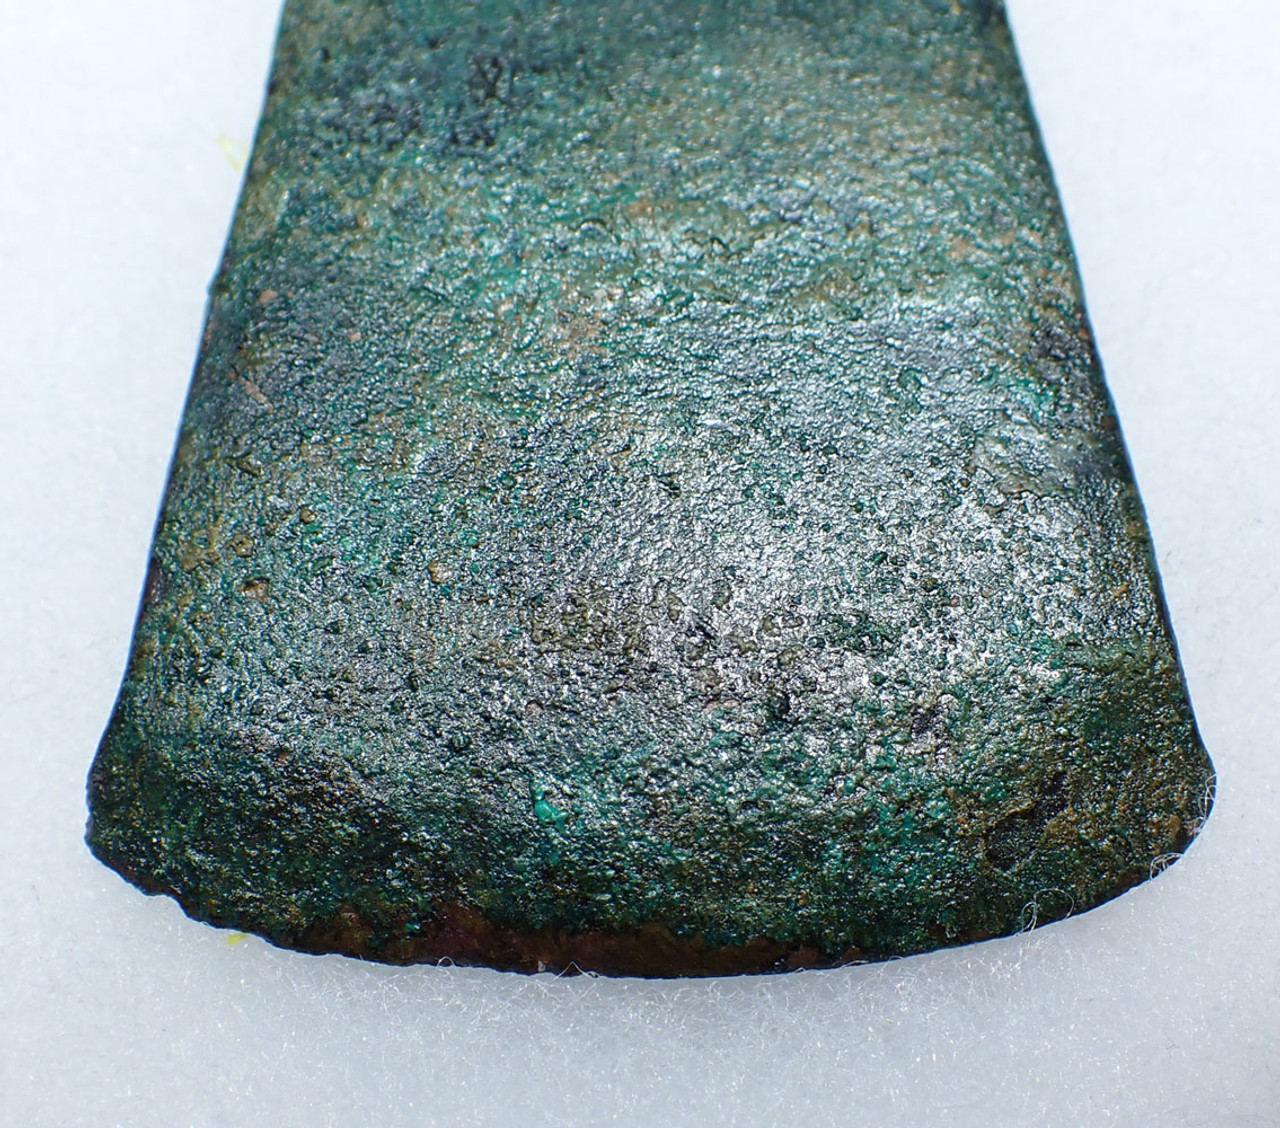 LARGE EARLY BRONZE AGE ANCIENT MESOPOTAMIAN COPPER BRONZE FLAT AXE FROM THE NEAR EAST FERTILE CRESCENT  *LUR373